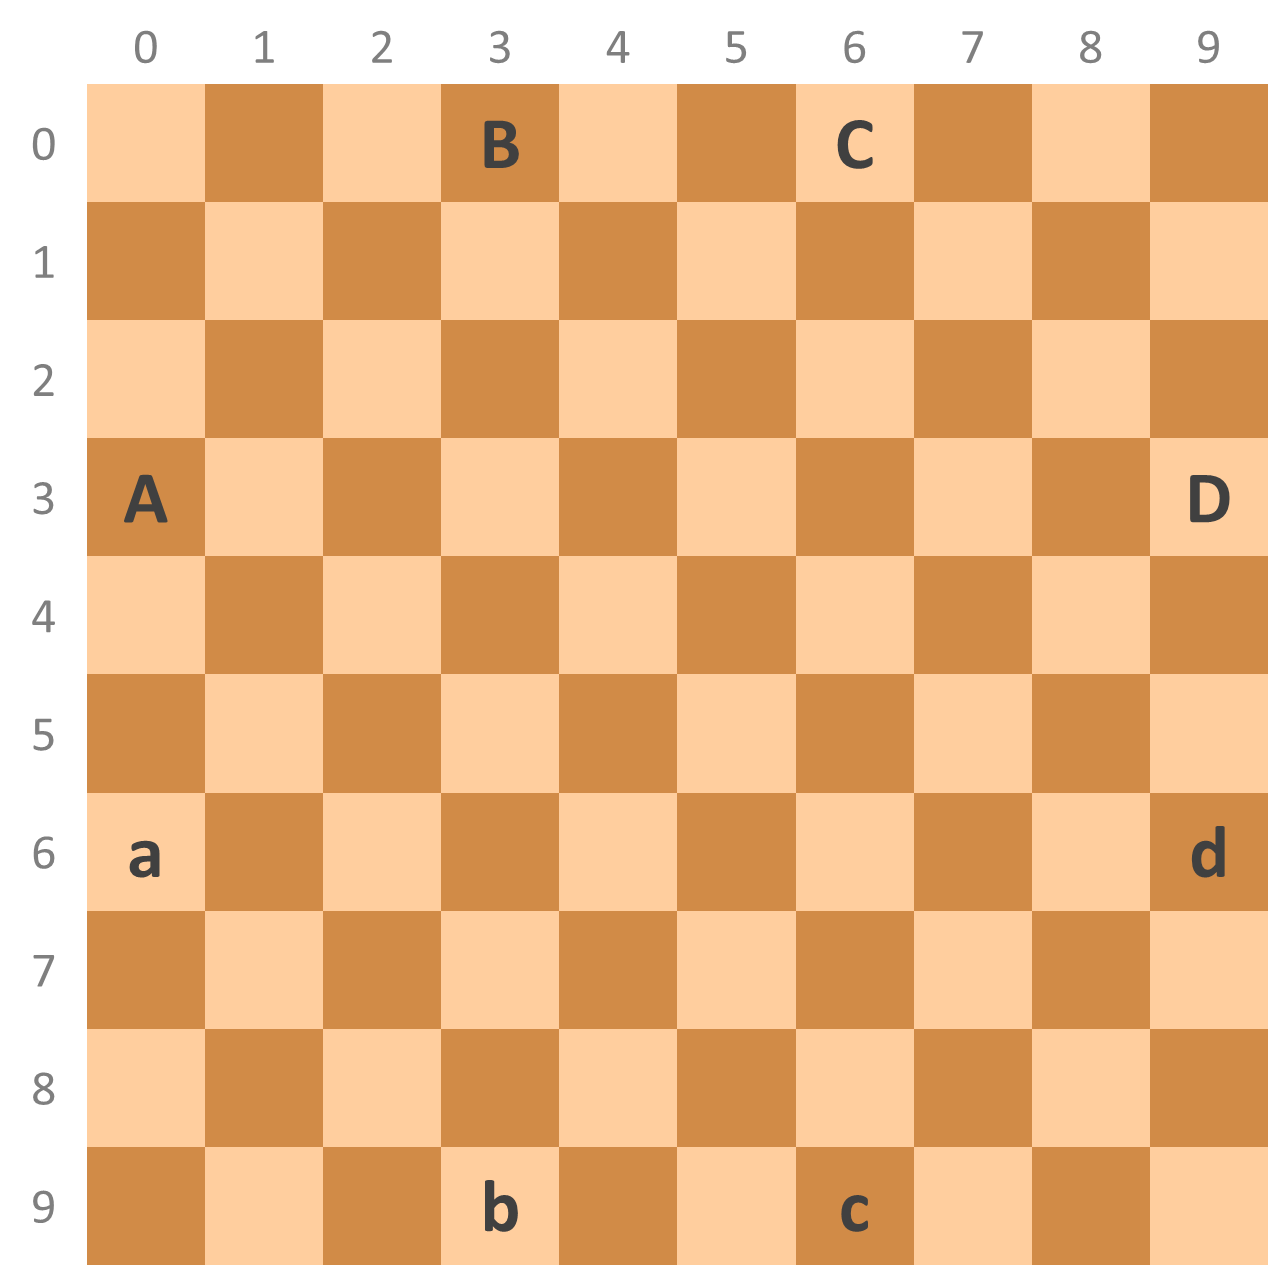 starting position (letters)